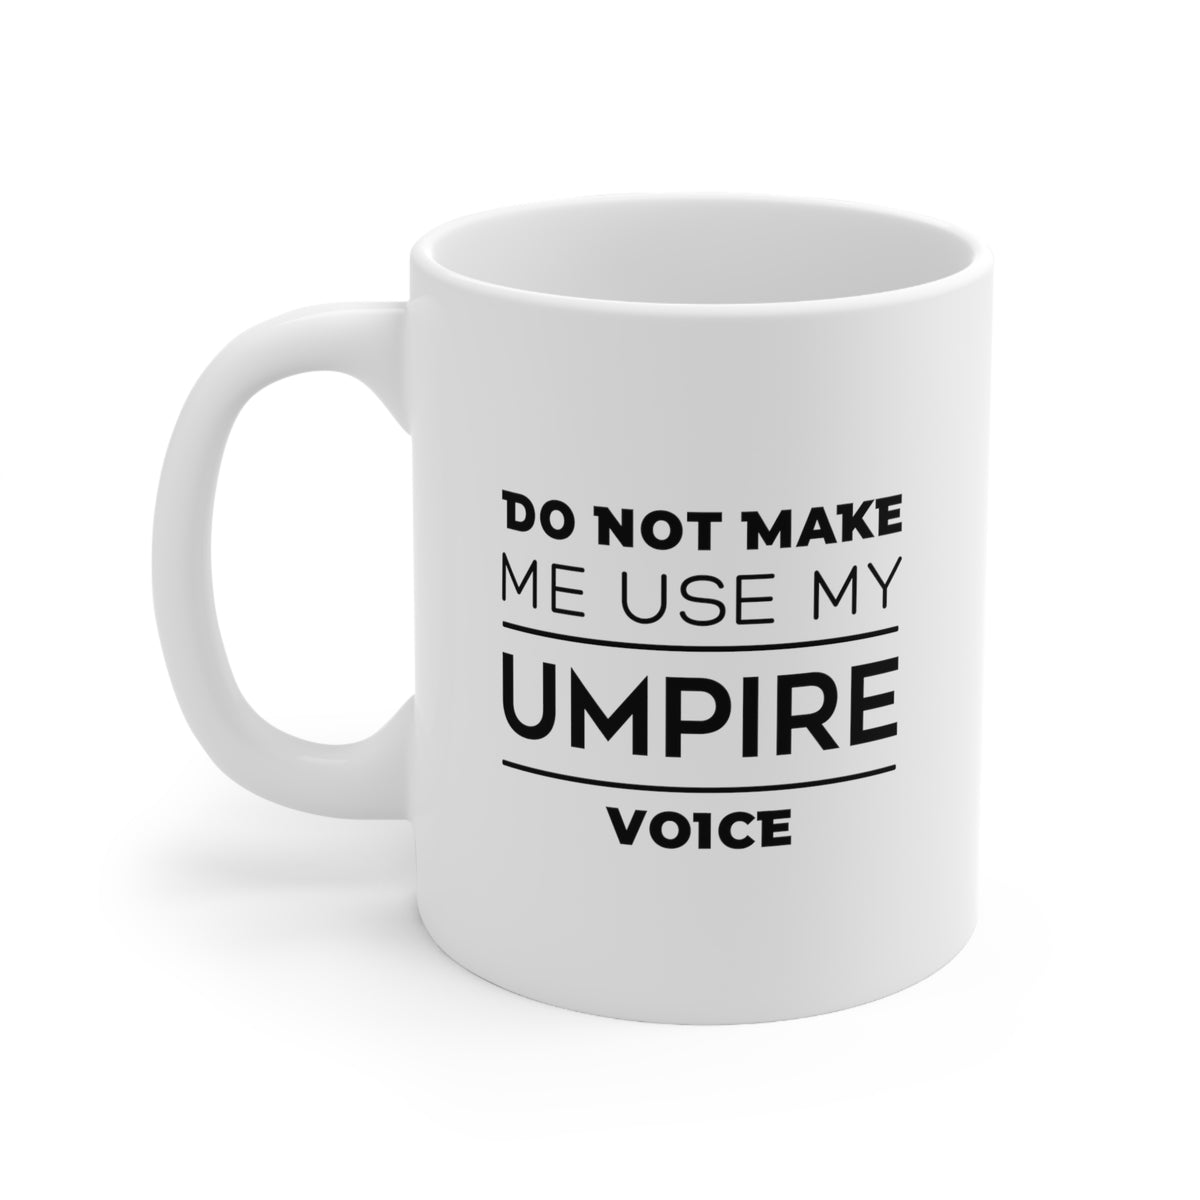 Umpire Coffee Mug - Umpire Voice Cup - Unique Funny Inspirational Gift for Men and Women